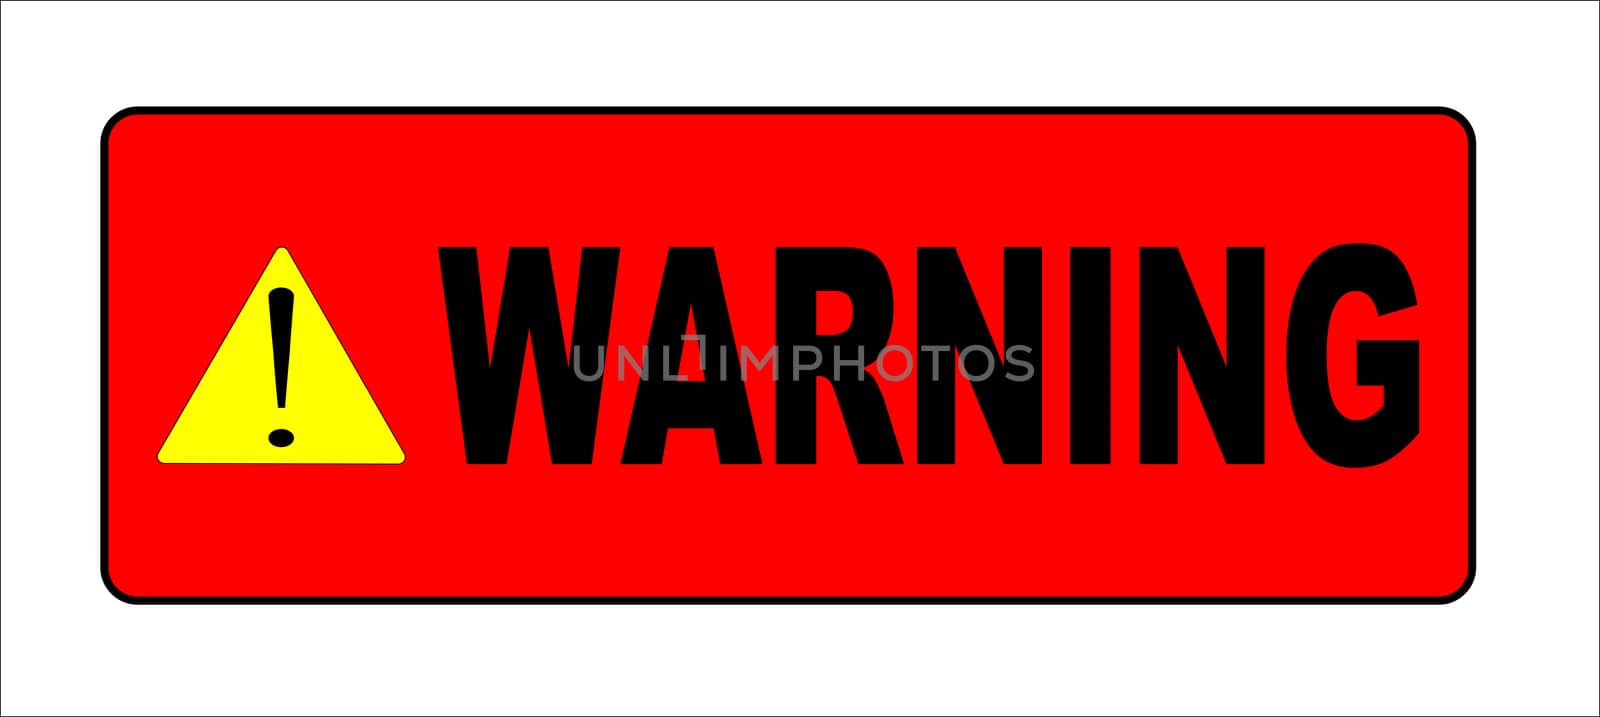 Warning sign in red over a white background